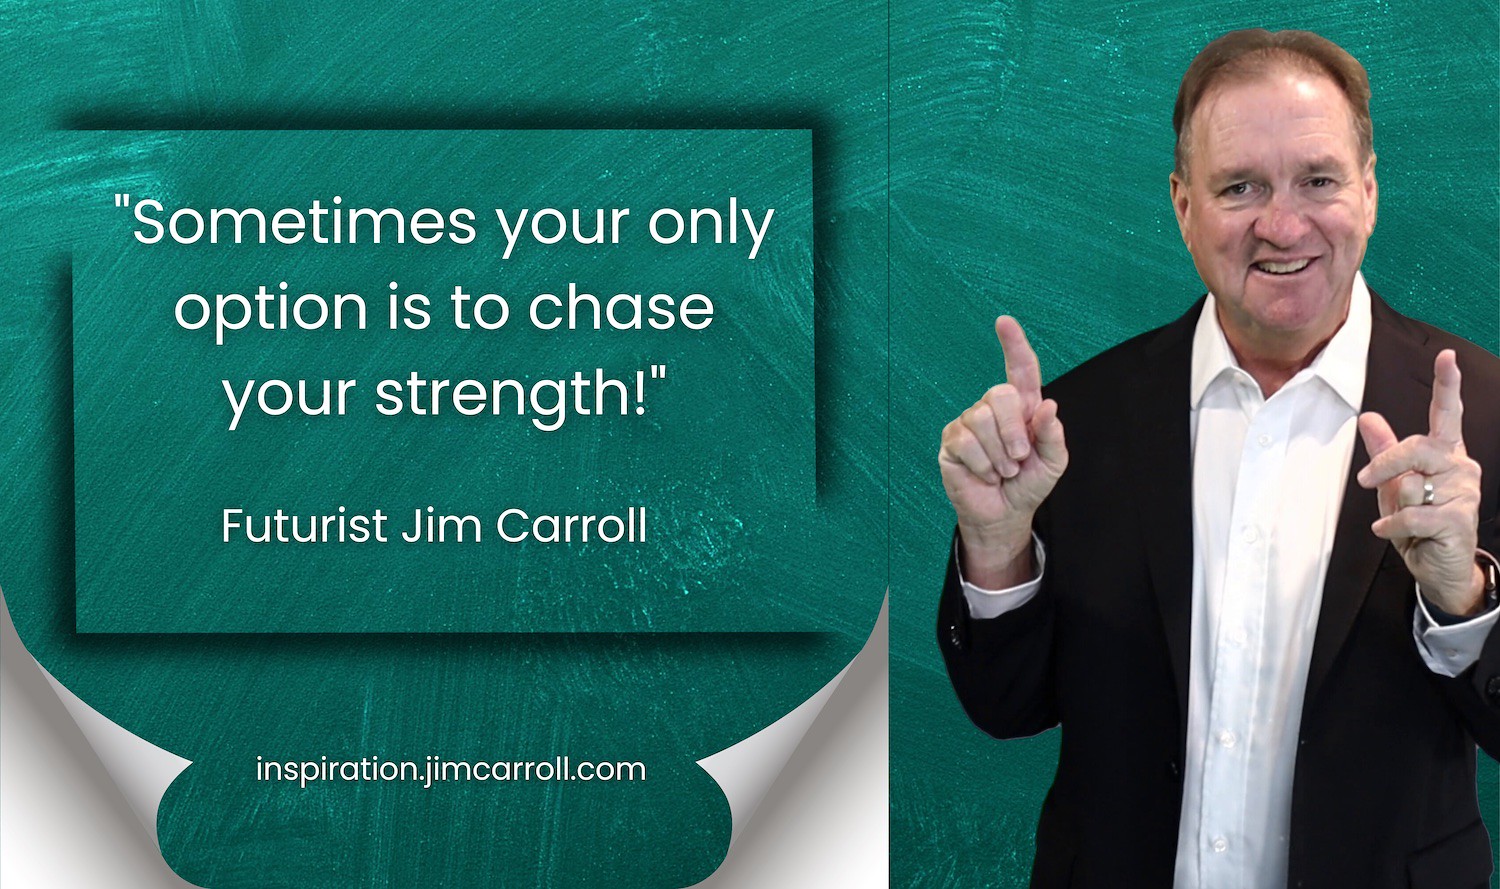 "Sometimes your only option is to chase your strength!" - Futurist Jim Carroll